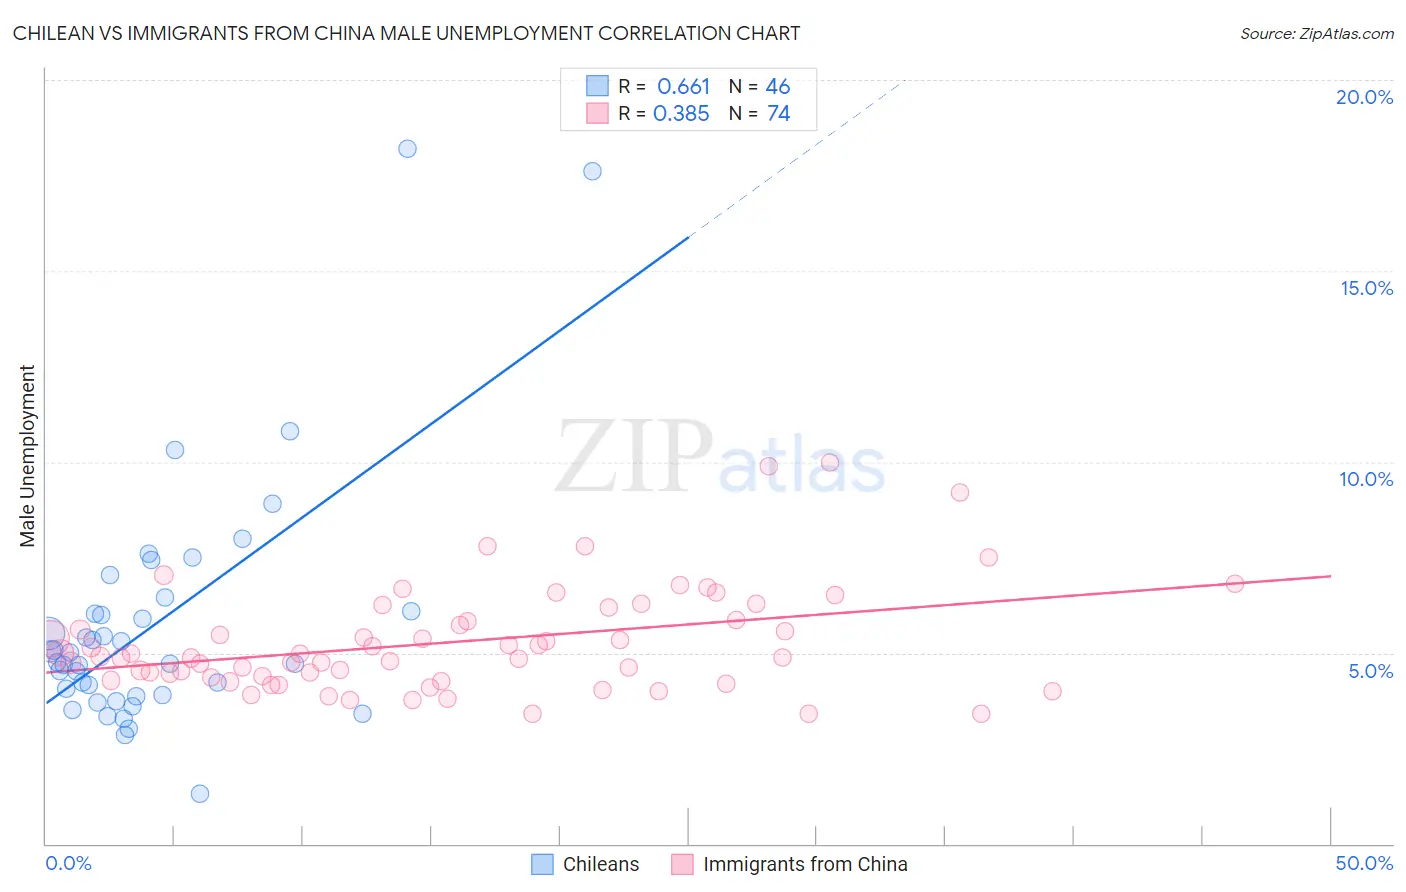 Chilean vs Immigrants from China Male Unemployment